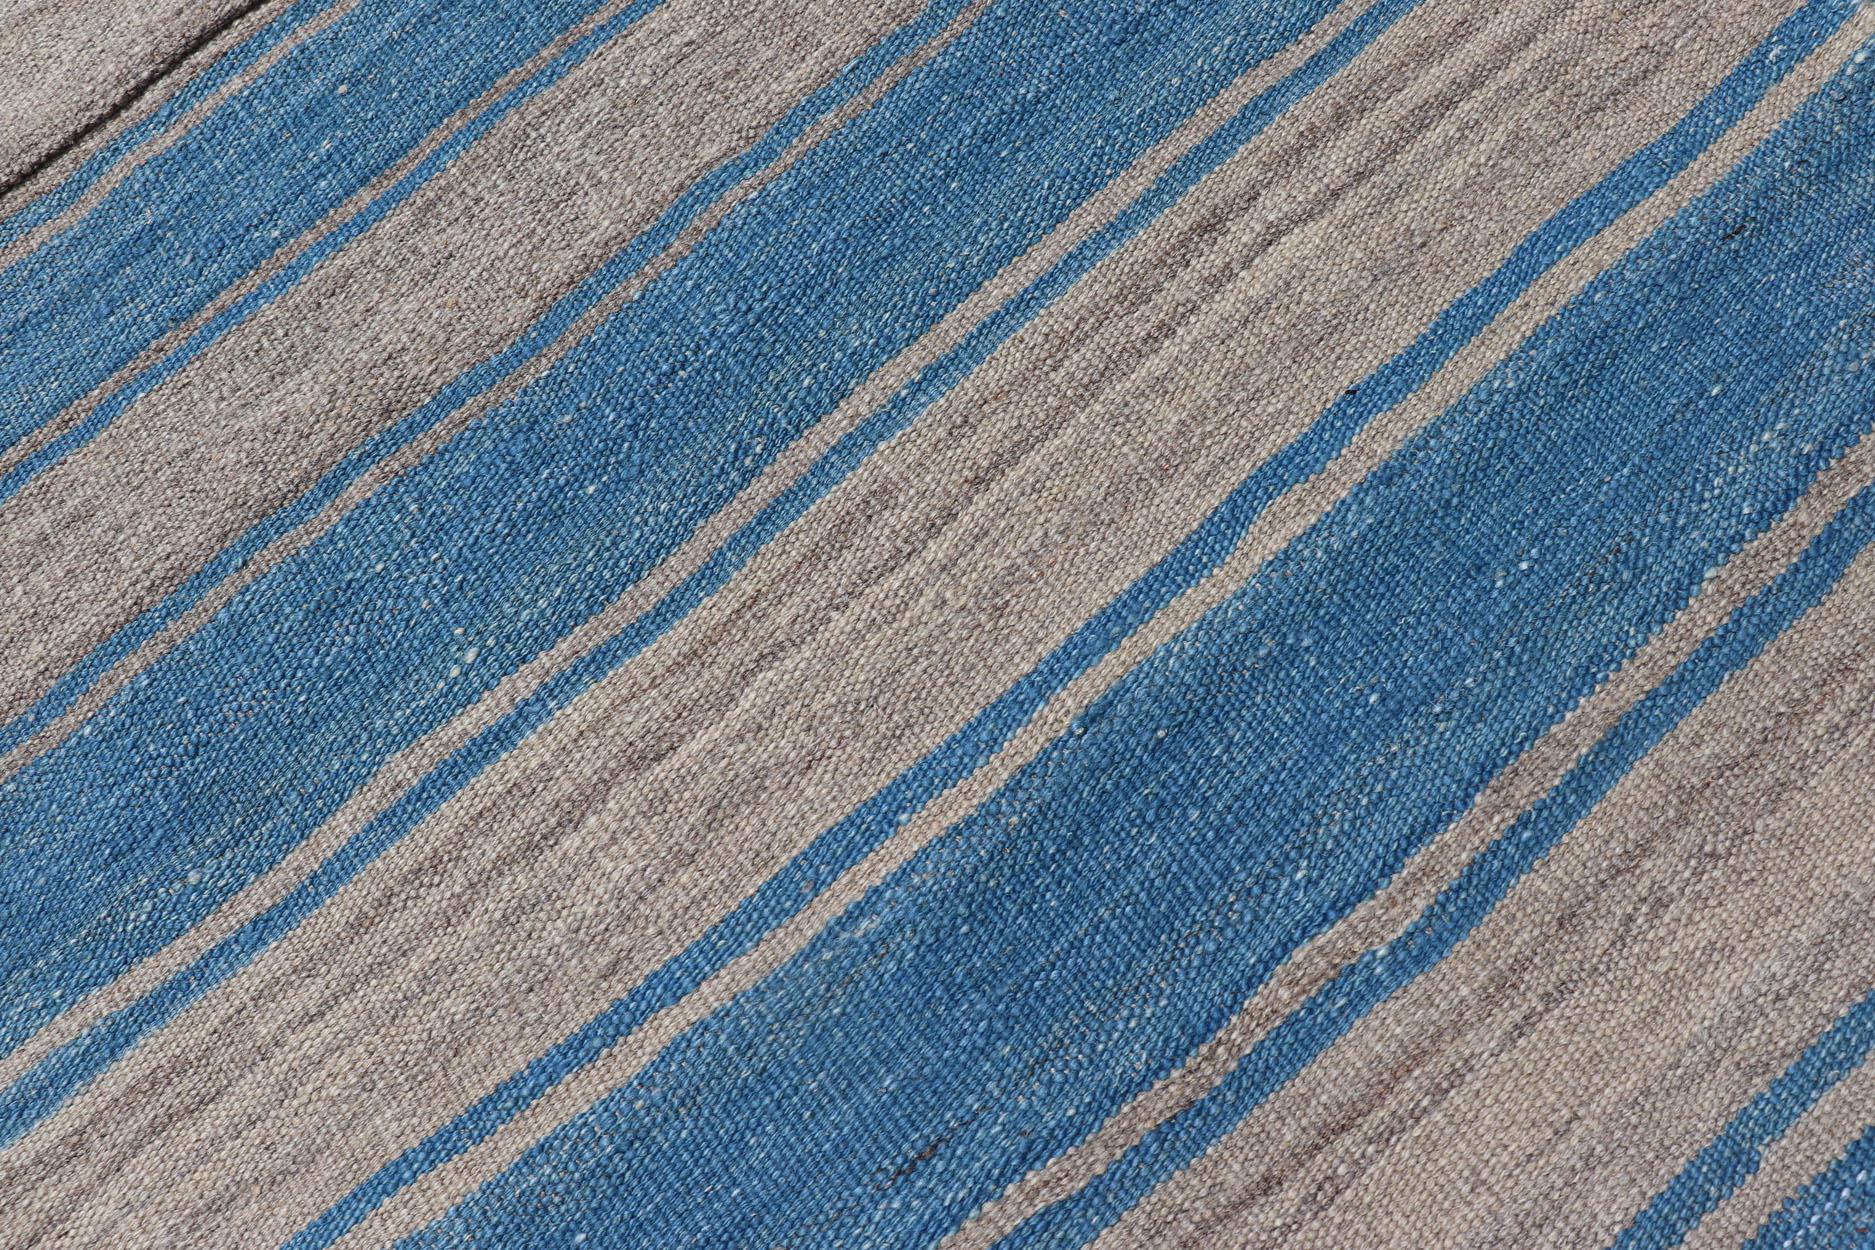 Contemporary Flat-Weave Modern Kilim Rug with Stripes in Shades of Blue and Gray For Sale